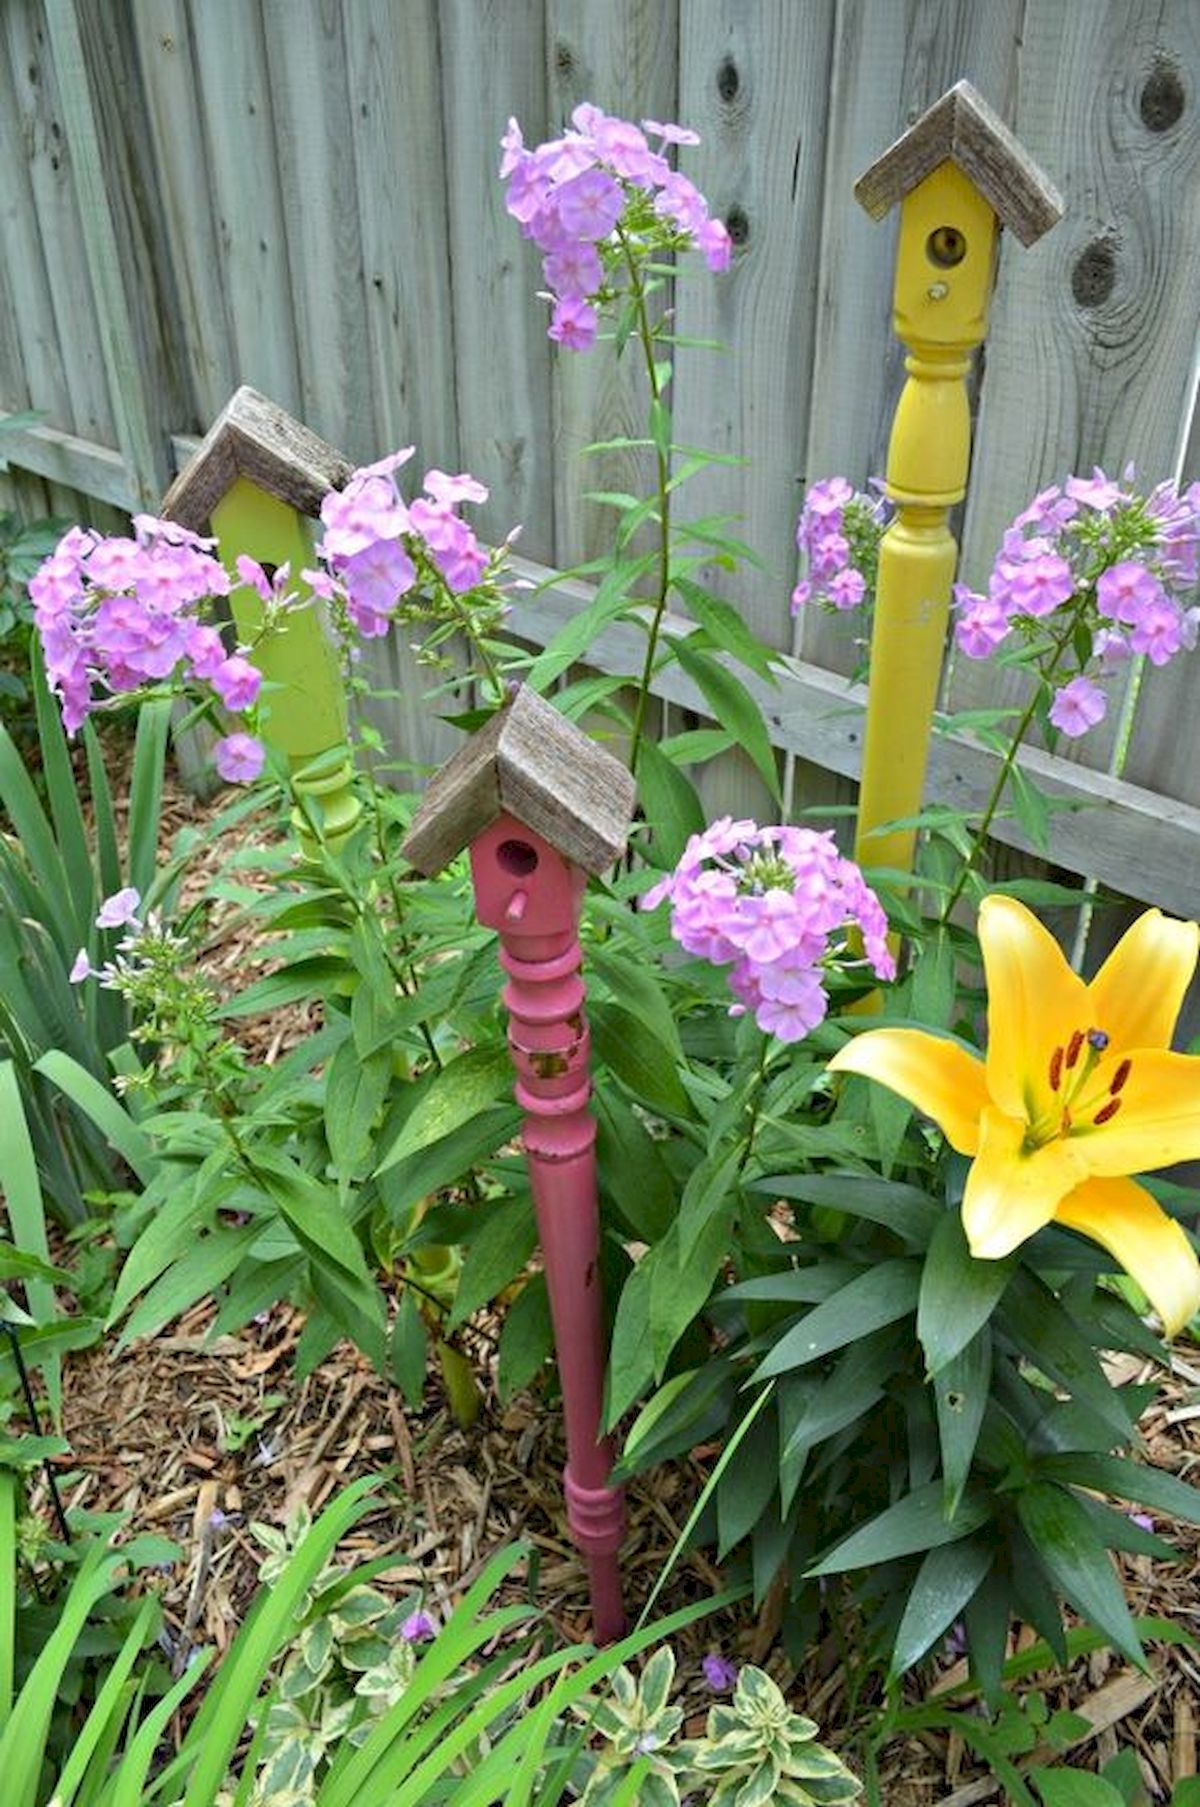 garden diy junk whimsical unique whimsy gardening decor flower stakes yard projects shiftingroots gardens bed tips flowers late summer beds